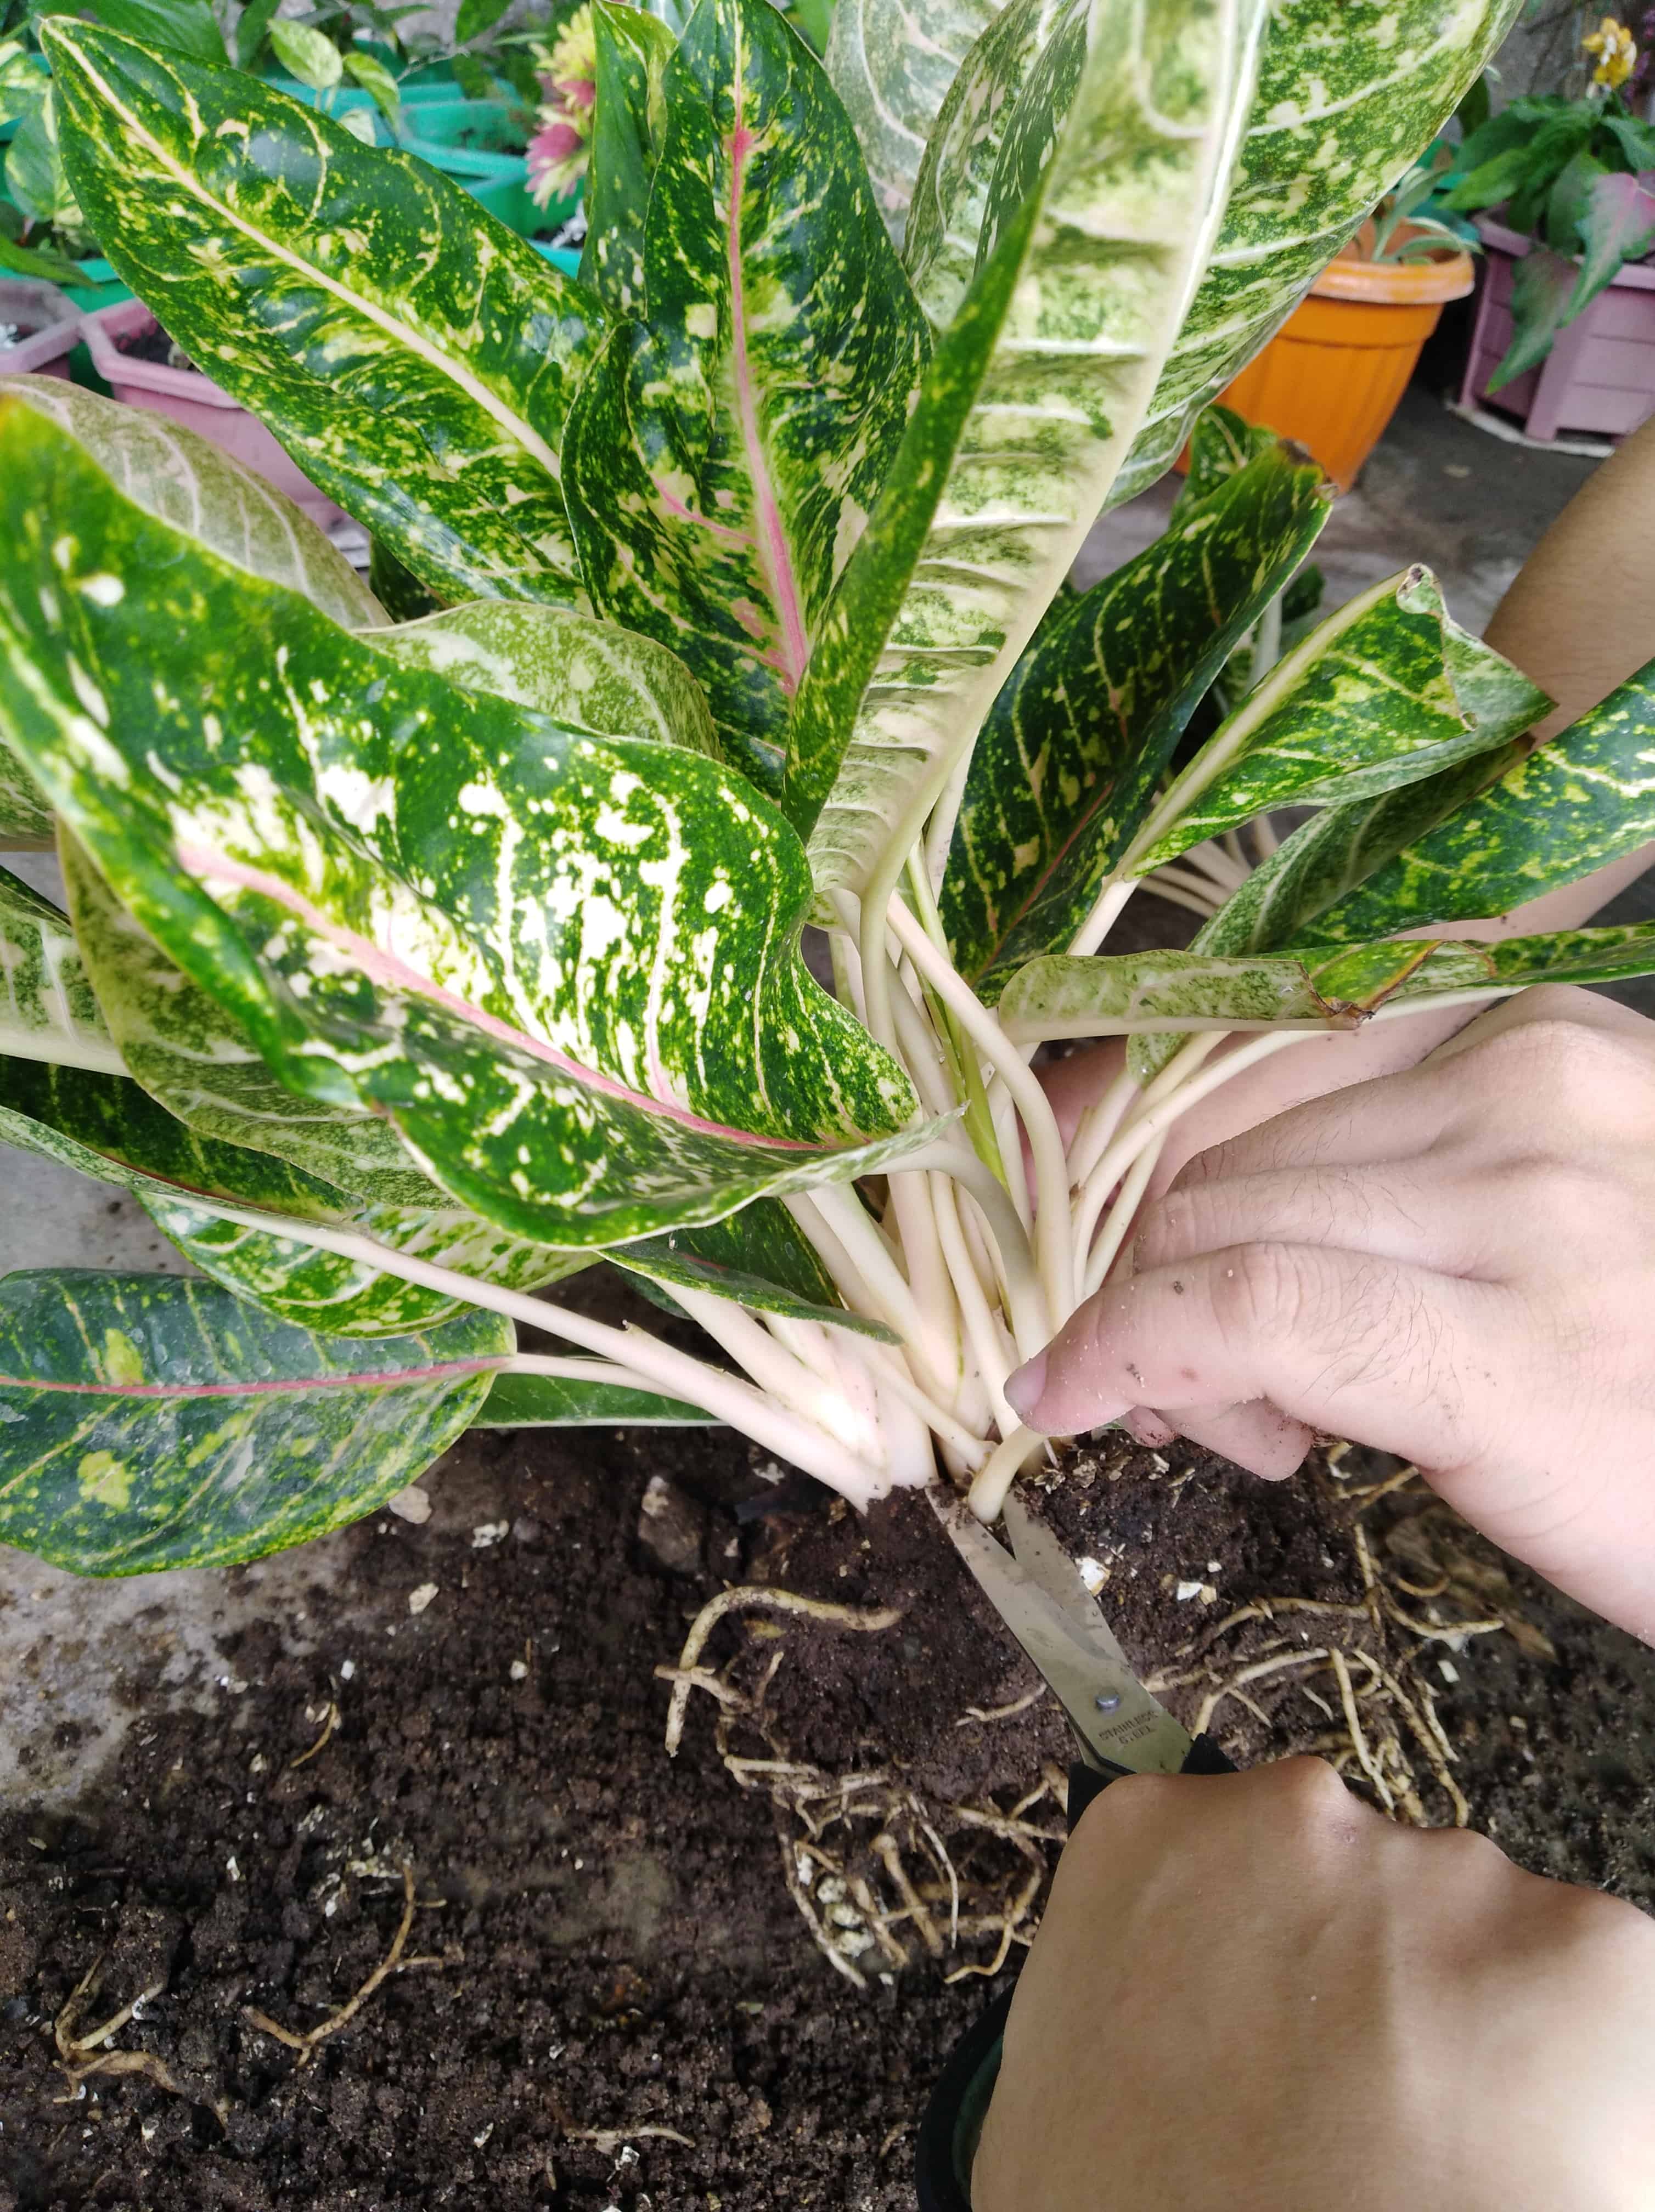 Snipping off stems of the plant to balance the remaining roots with the remaining foliage.